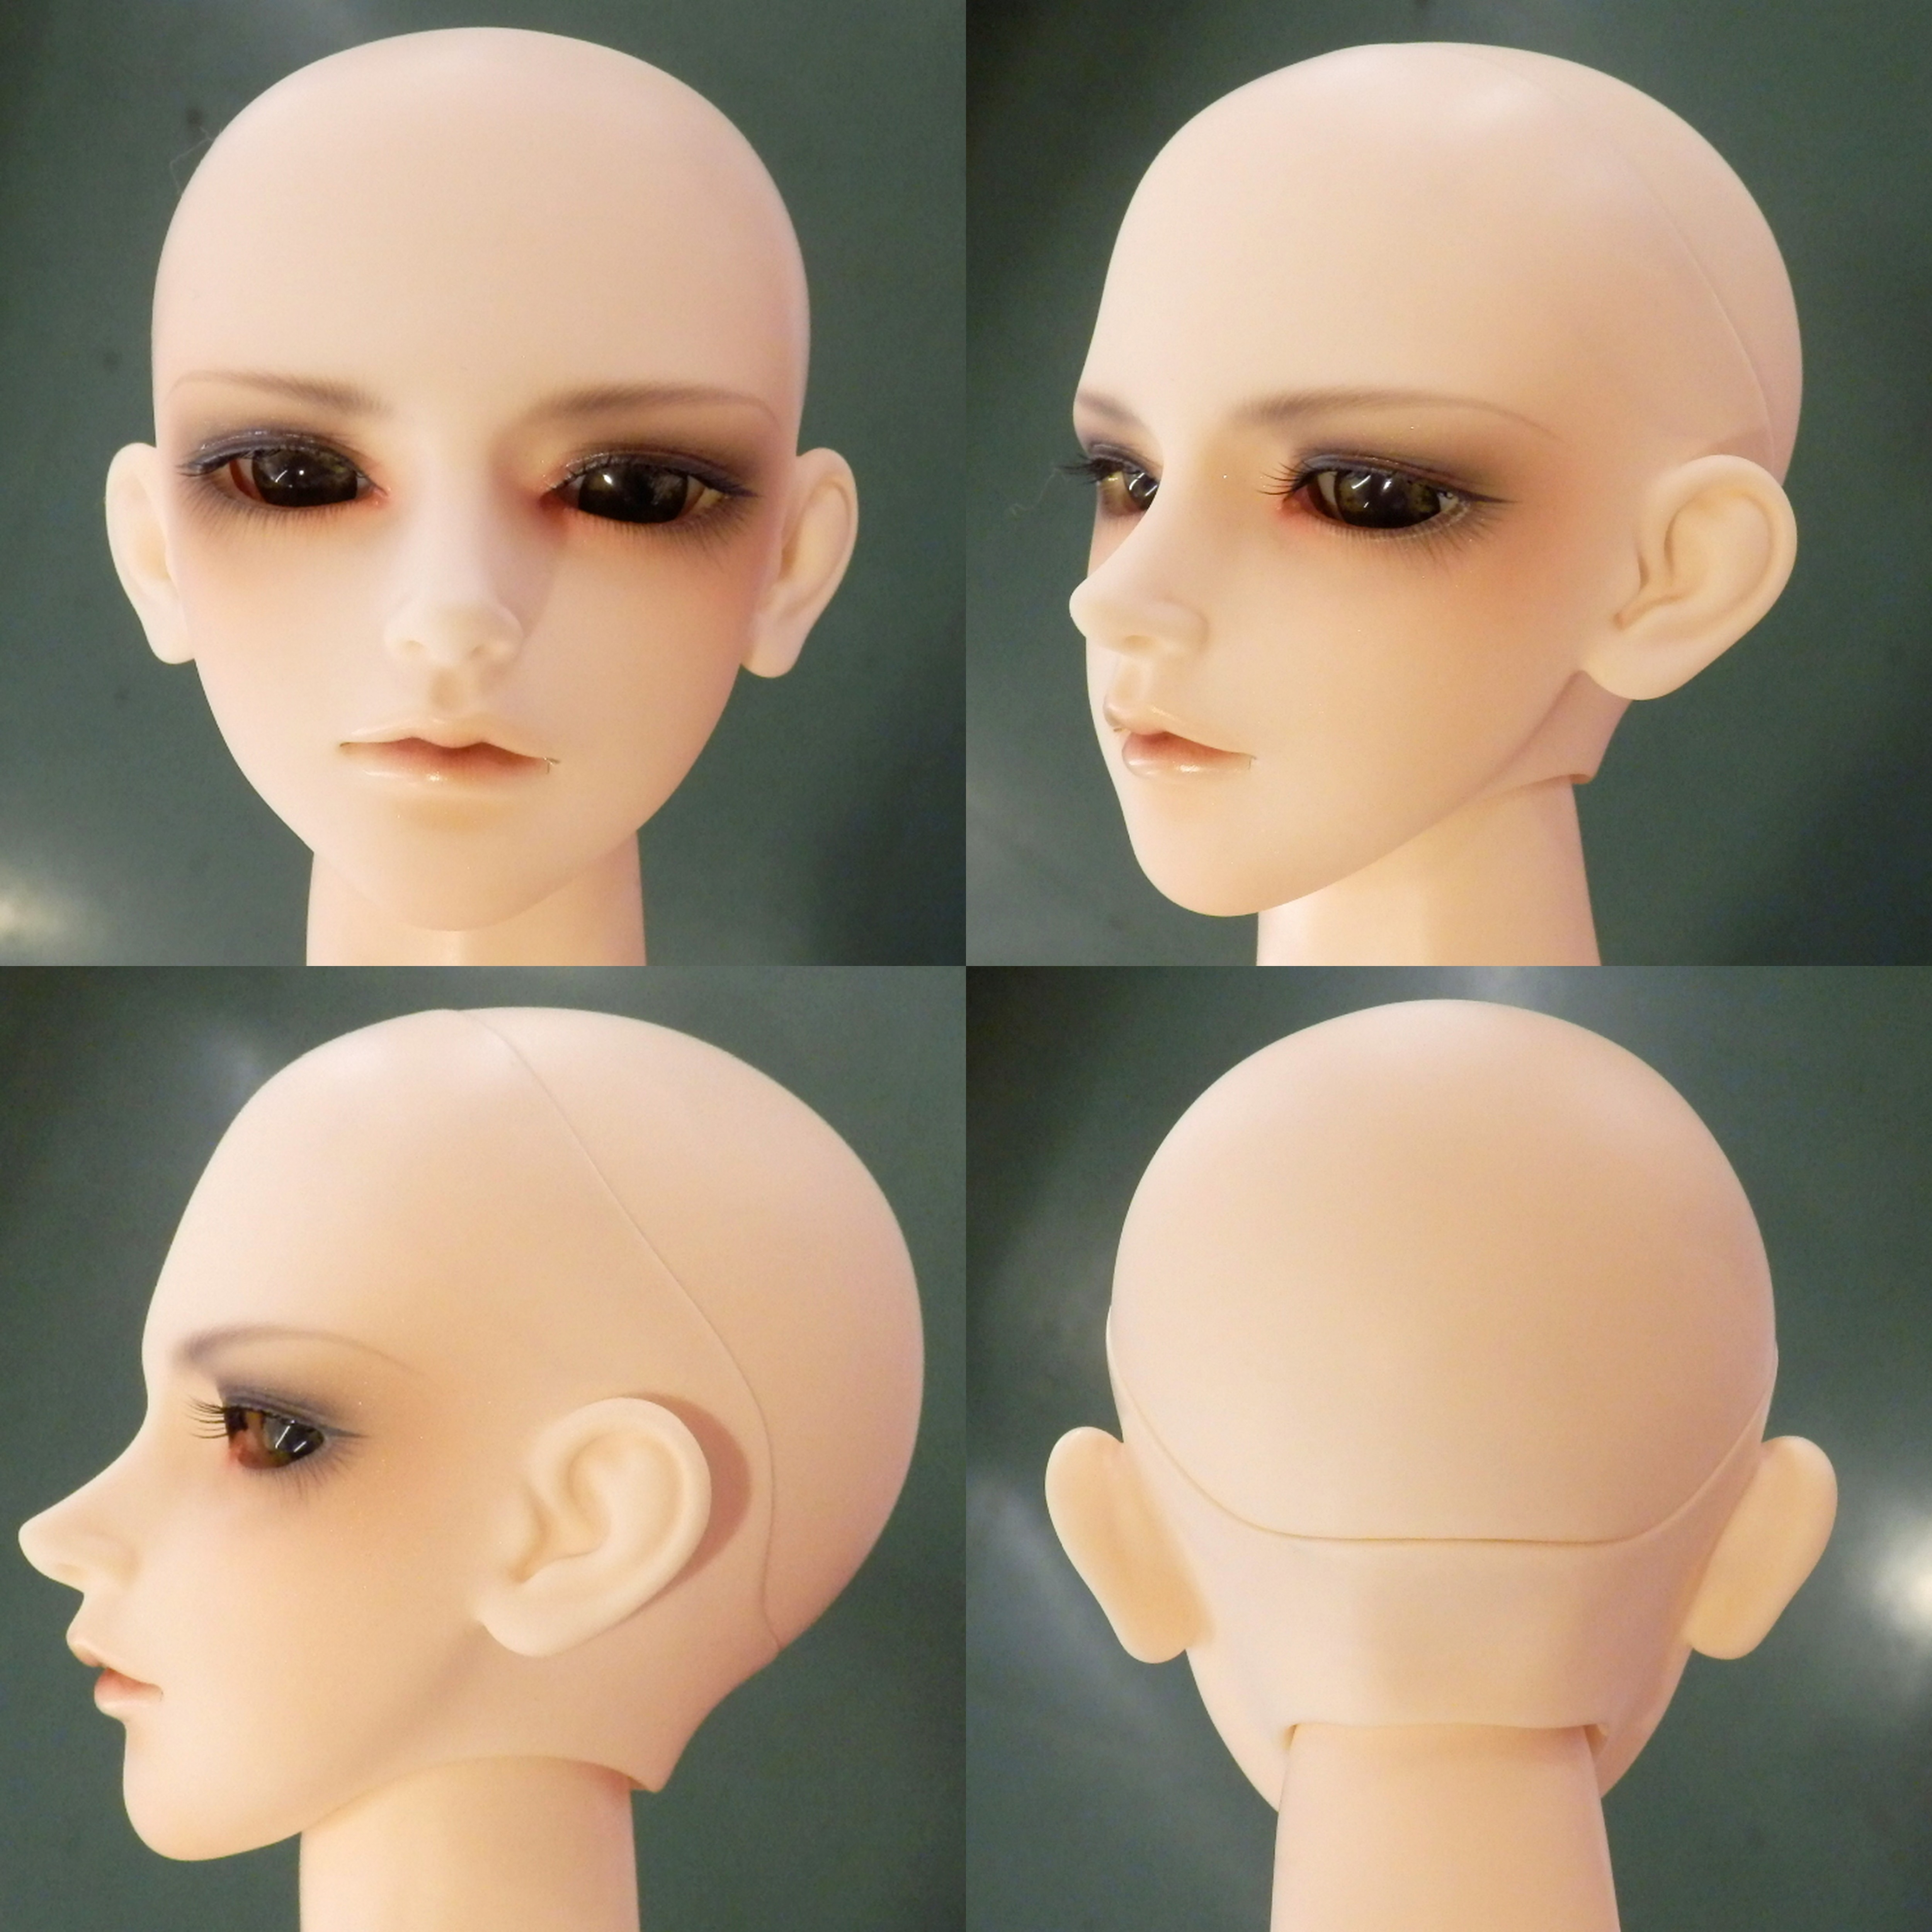 BJD CROBI-DOLL M Line? (65cm) characters unknown head in time